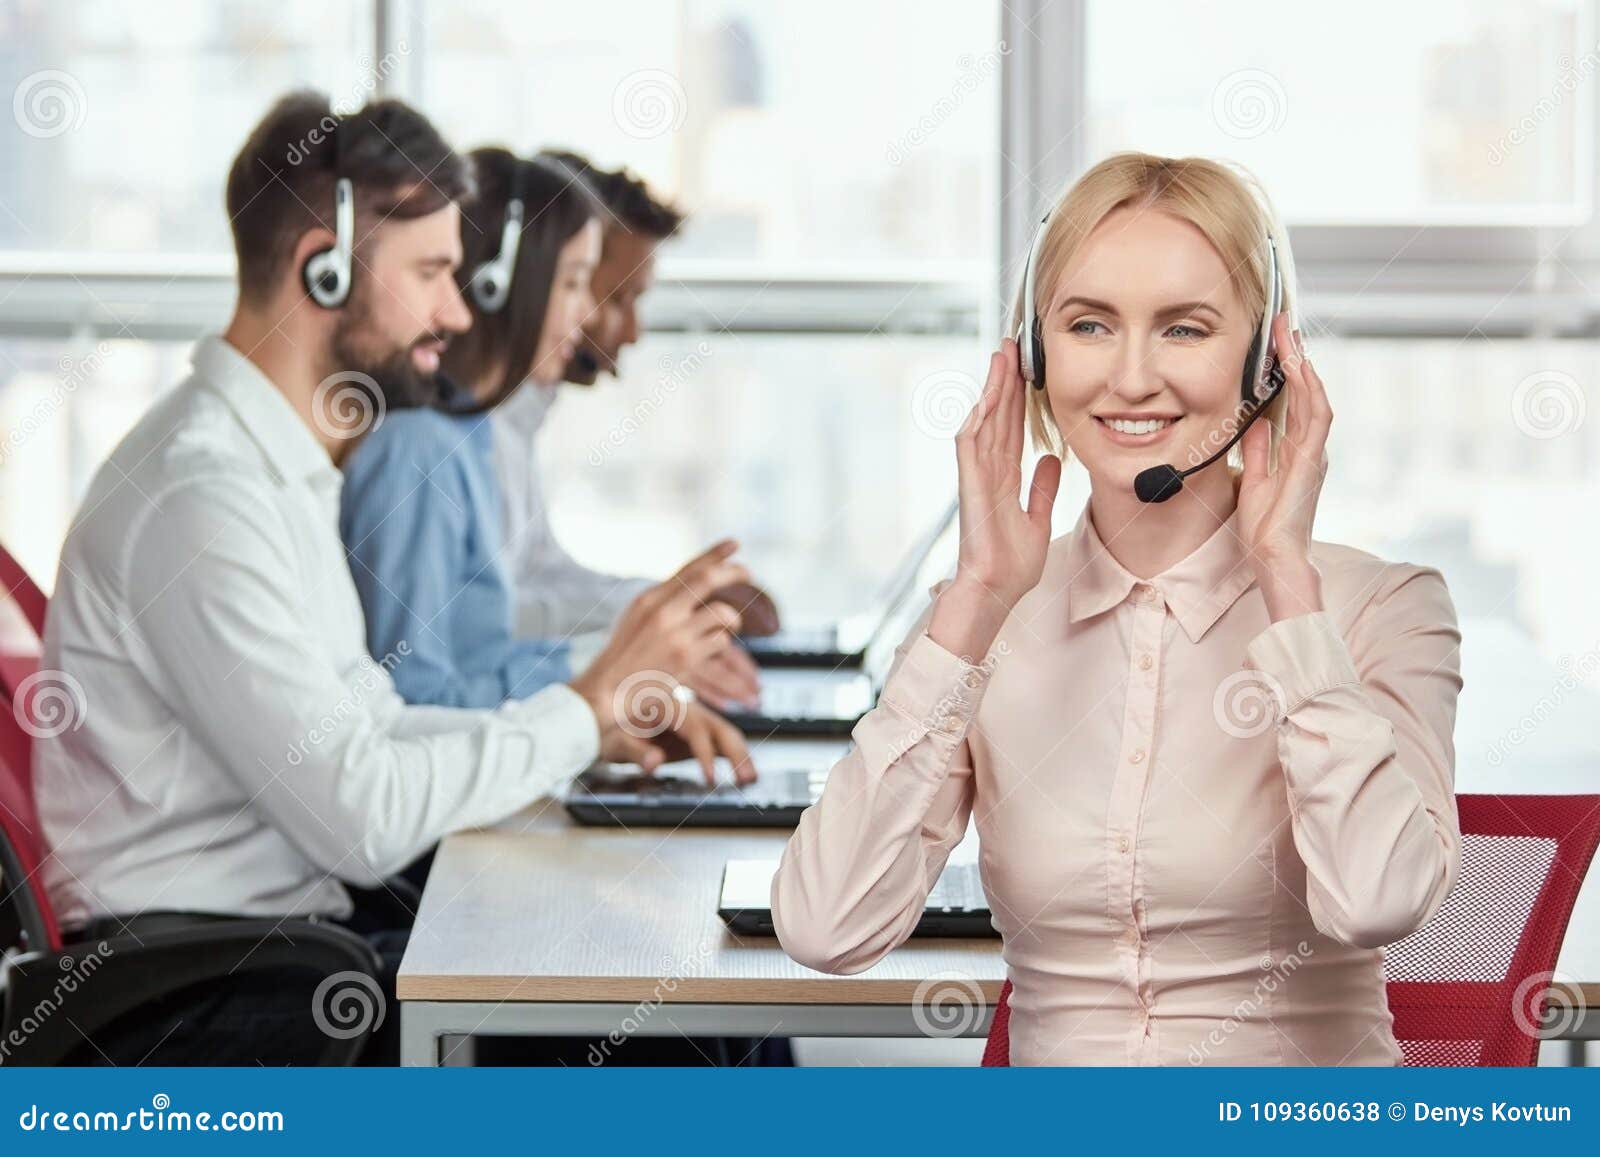 Call Center Service Operator Listening To Headset Stock Photo Image